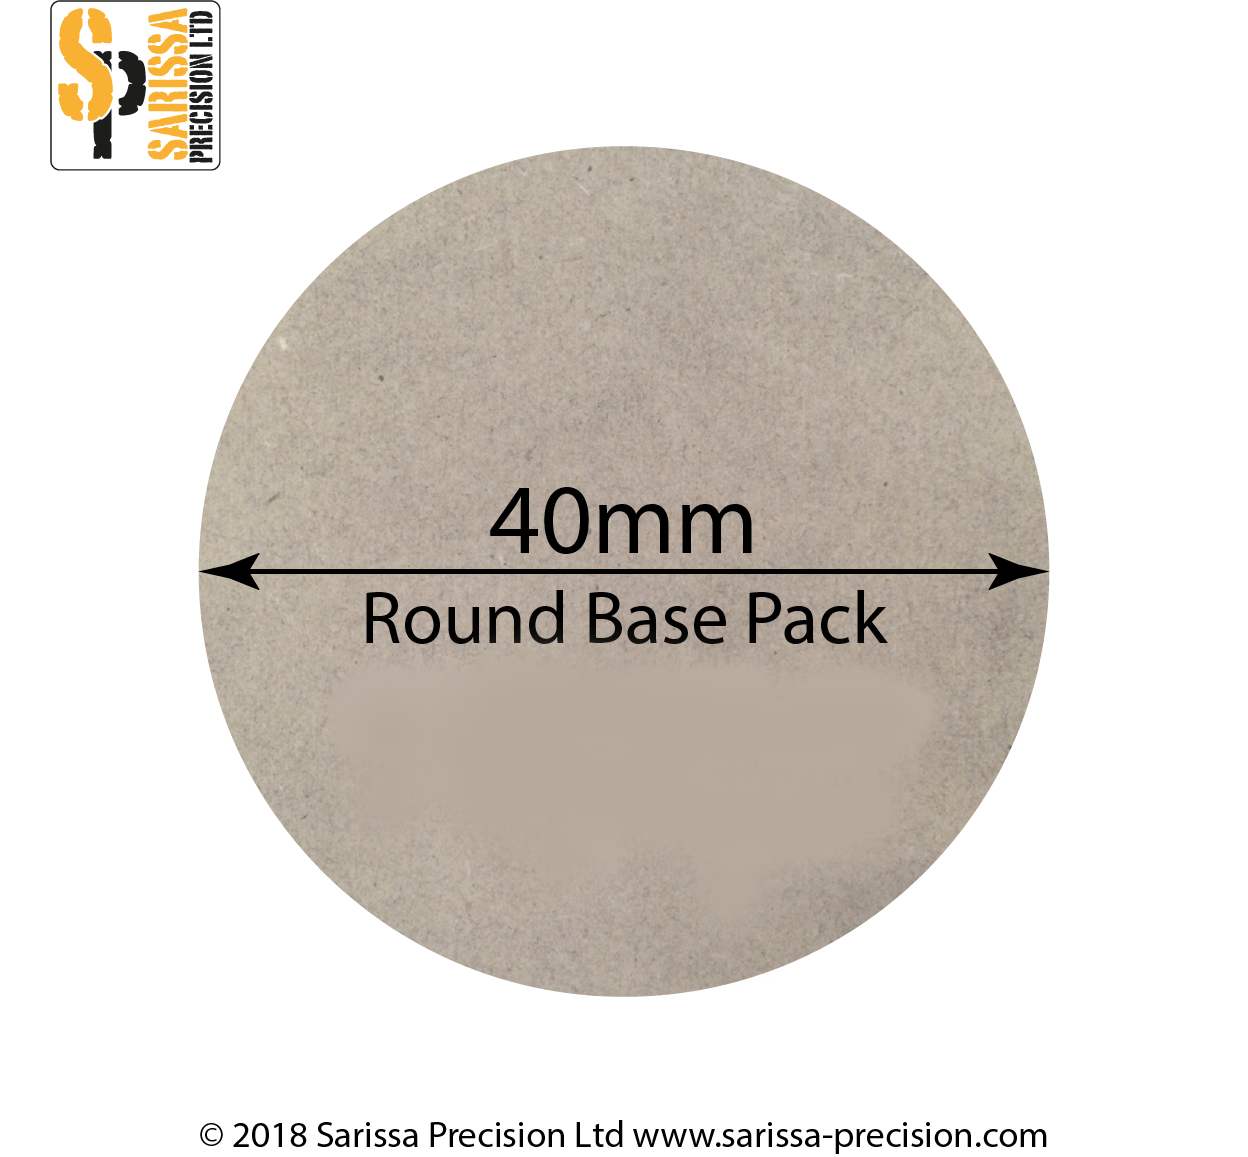 40mm Round Base Pack